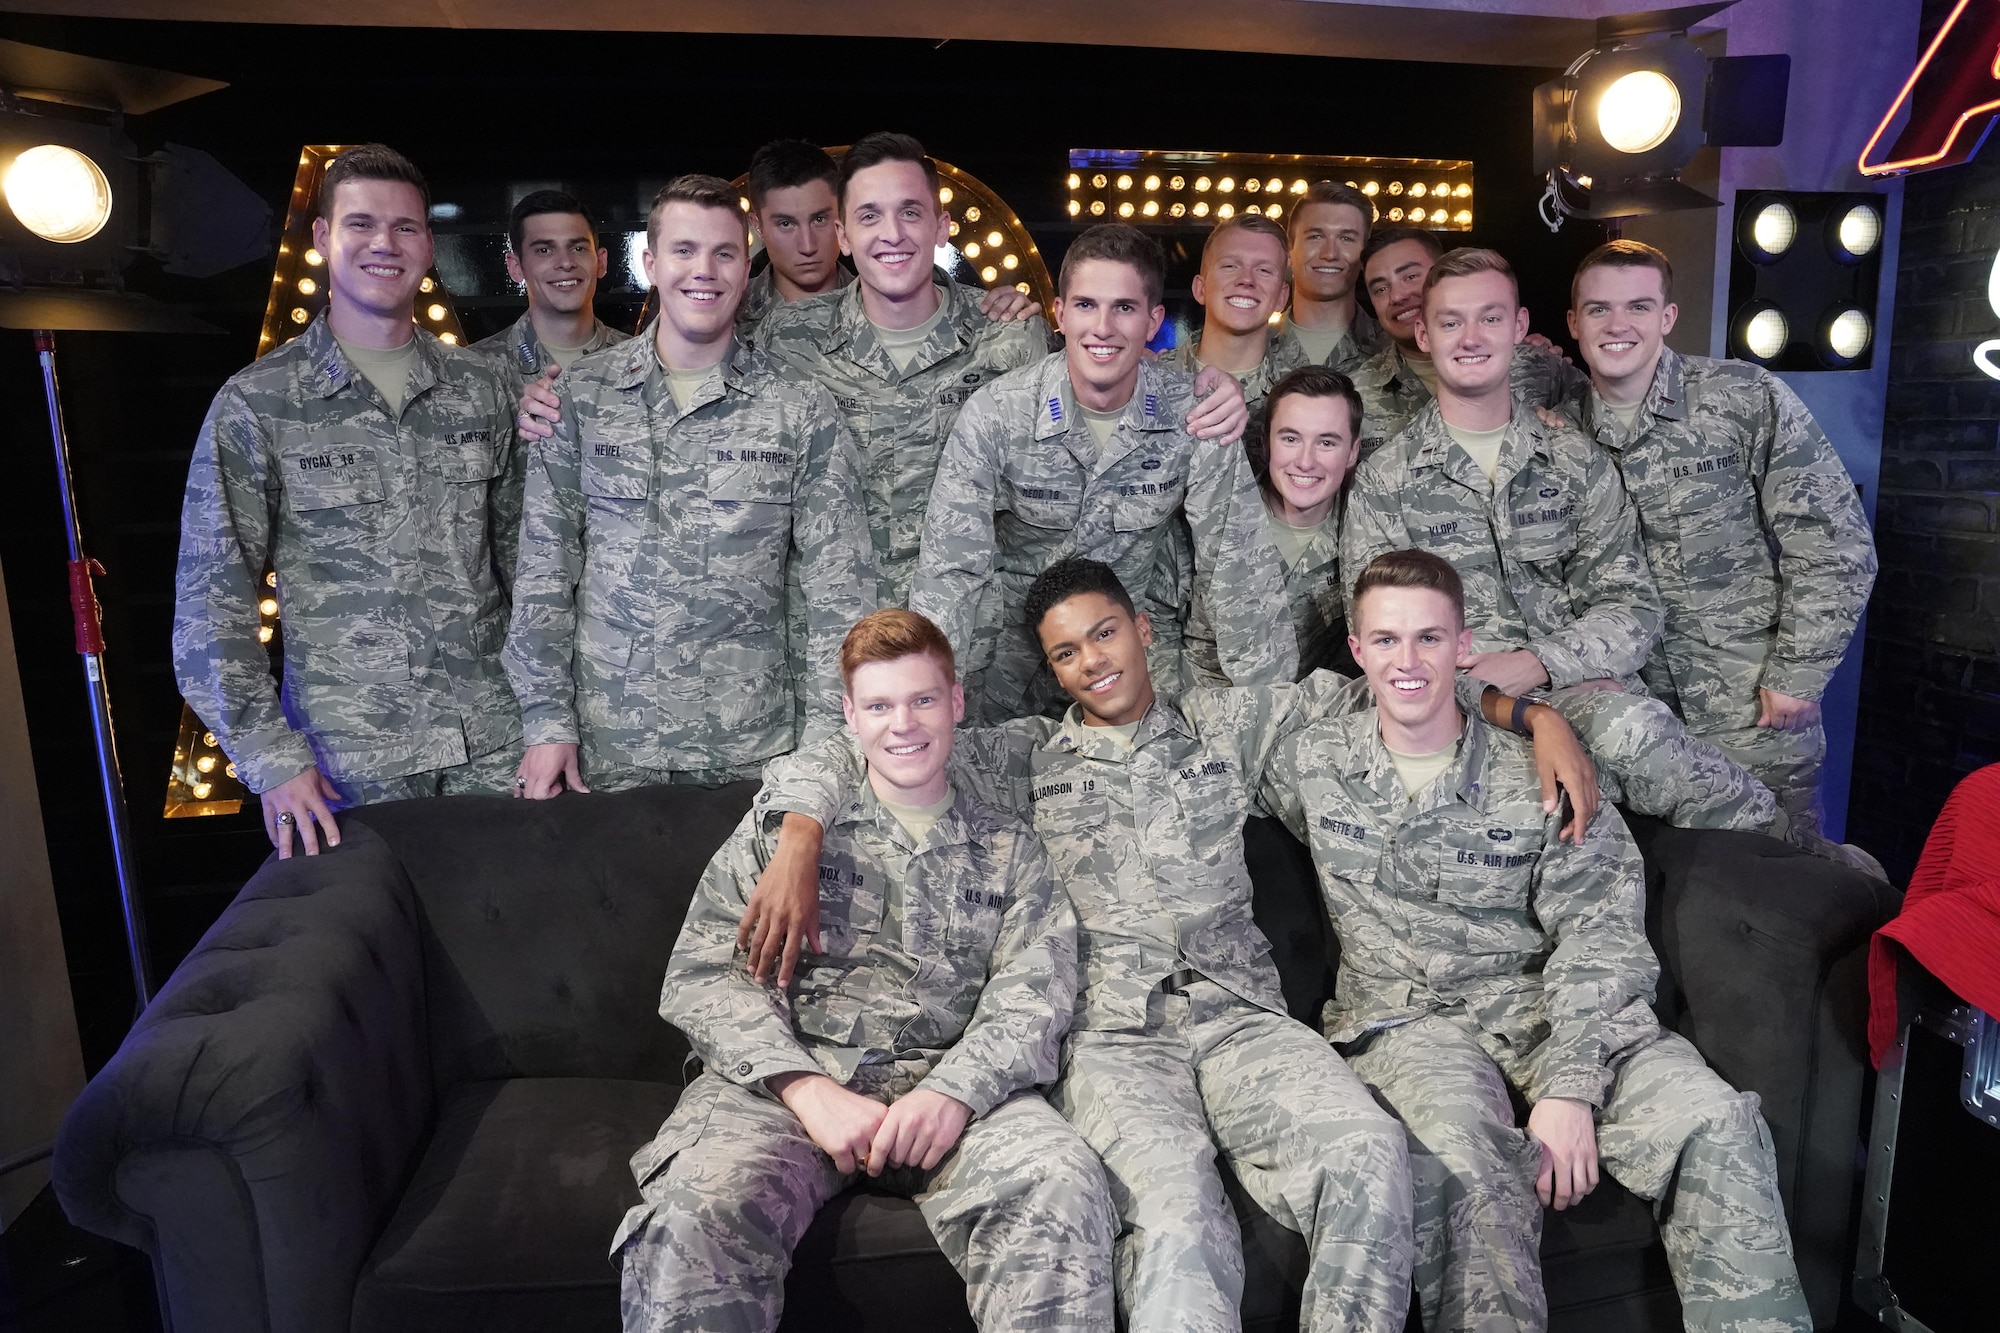 Members of the In the Stairwell pose in the lounge during the Quarter Finals of America’s Got Talent. For each performance on AGT, the group wears a different Air Force uniform. (Courtesy photo by Kevin Polizzotto)